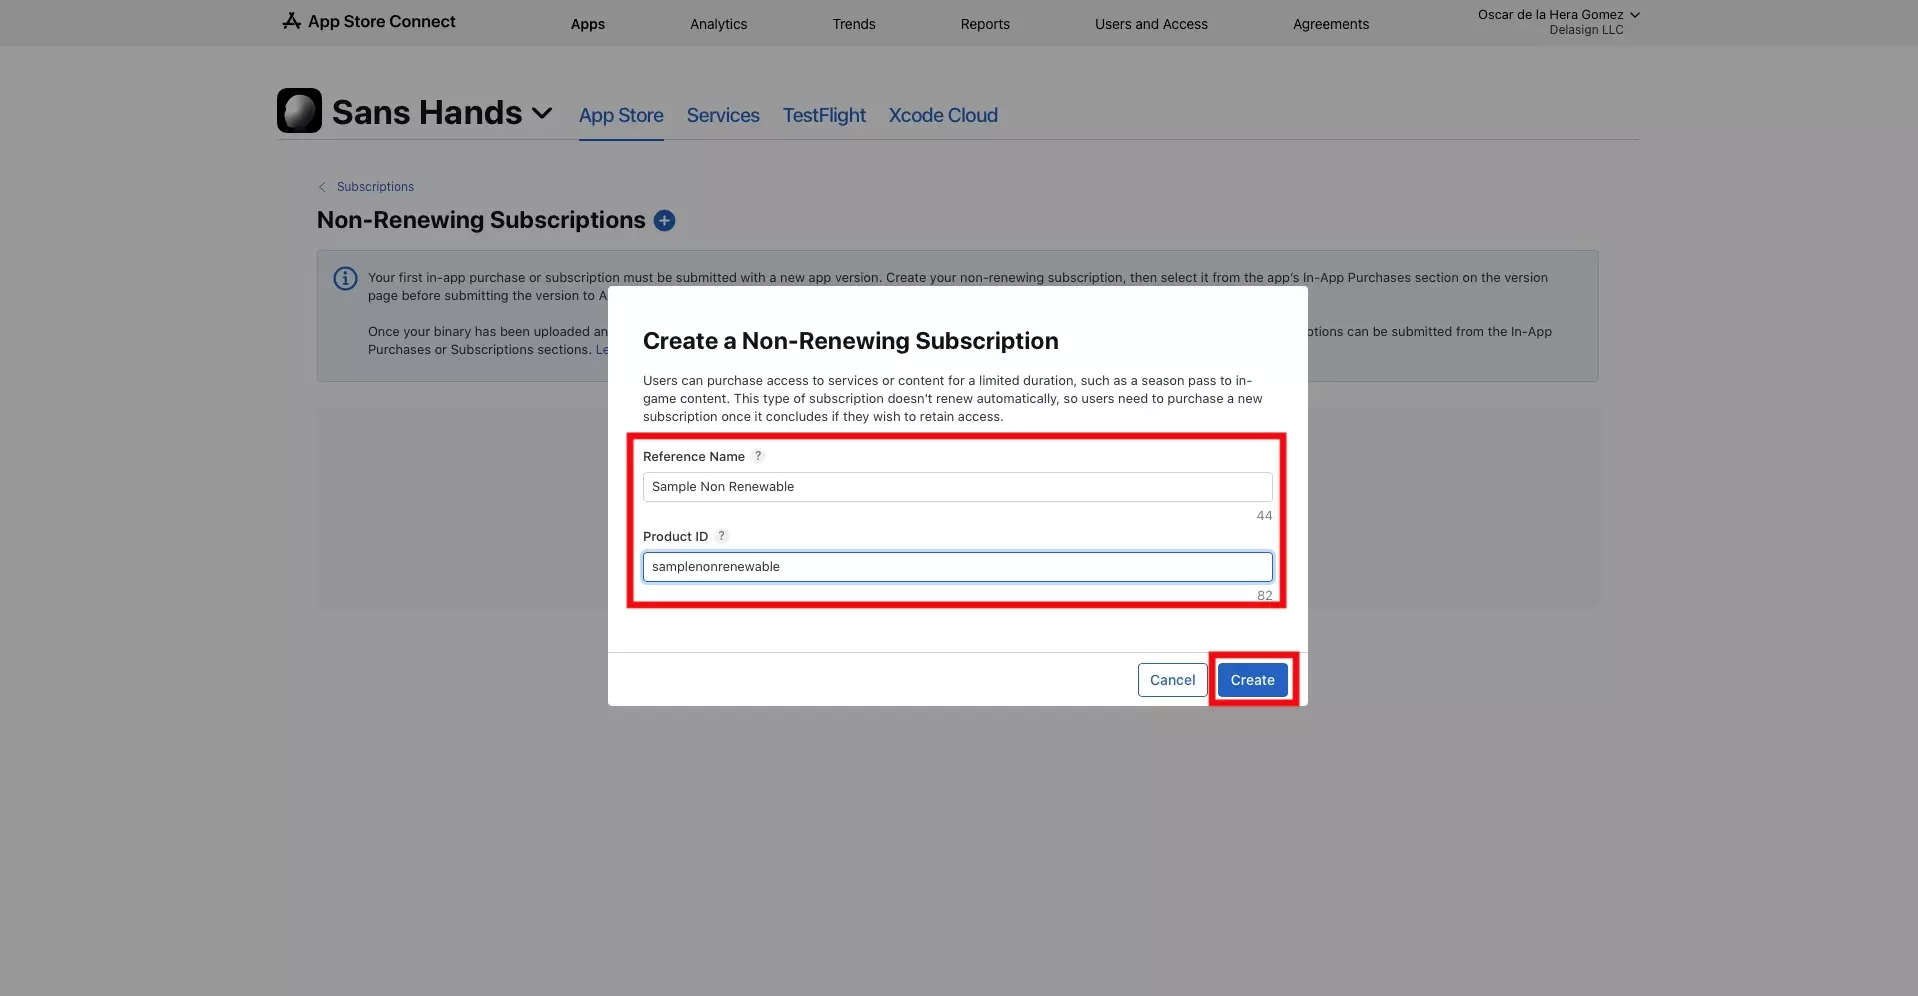 A screenshot of the Create a Non-Renewing Subscription modal. Highlighted is the reference name and product id, as well as the Create button on the bottom right that appears after you have filled in the details.